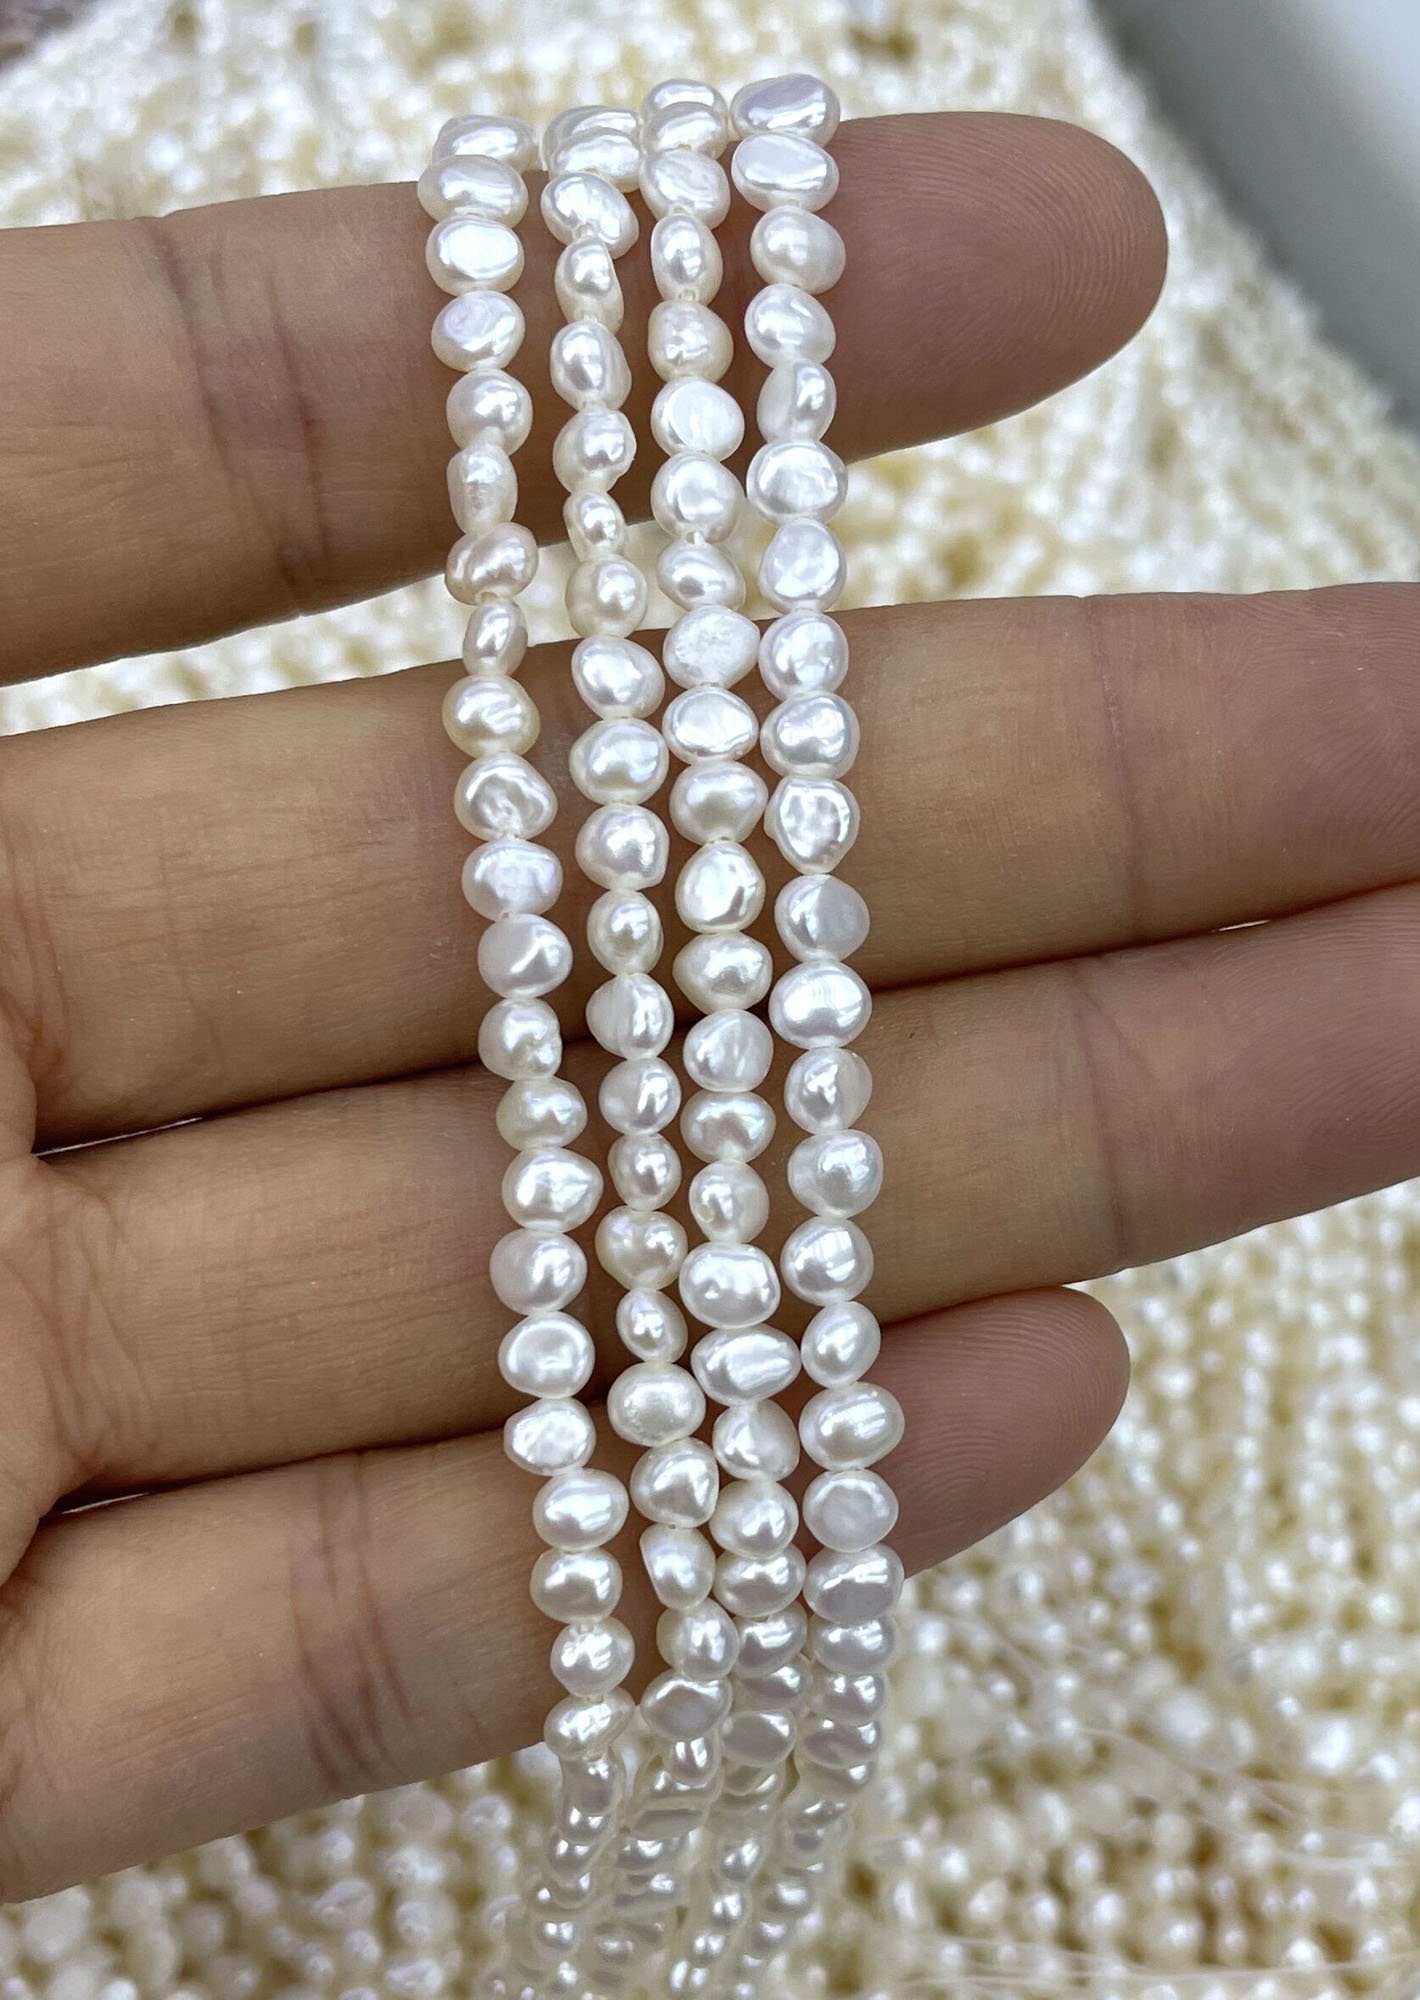 3-8mm High Luster Round Pearl Beads, 1.0mm hole, Pearl, Genuine Natural  White Round Freshwater Loose Pearl PB1871